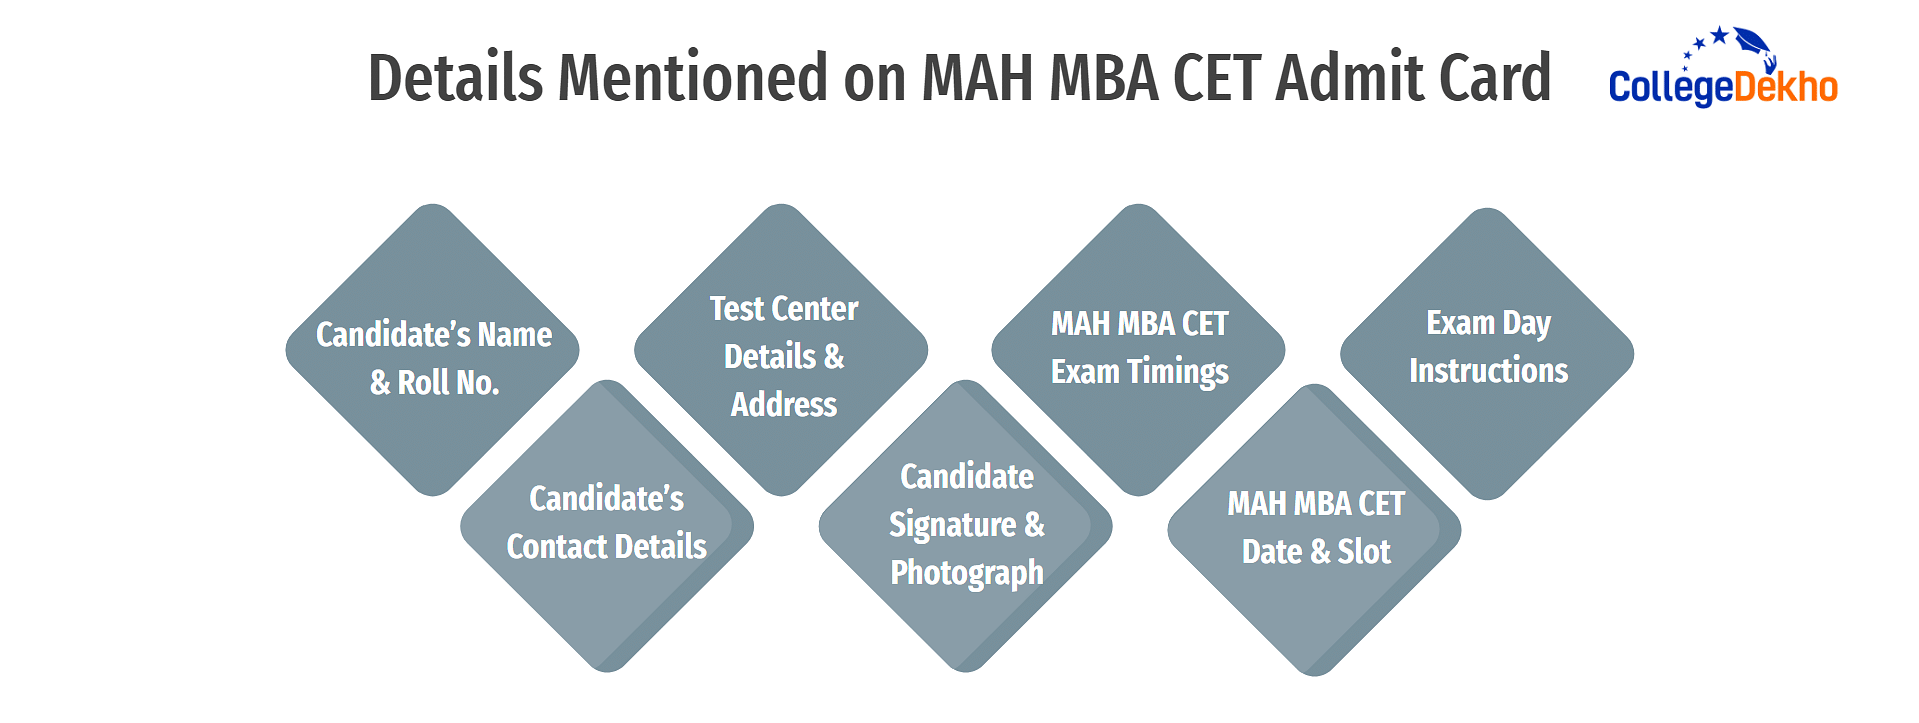 Details Mentioned on MAH MBA CET Admit Card